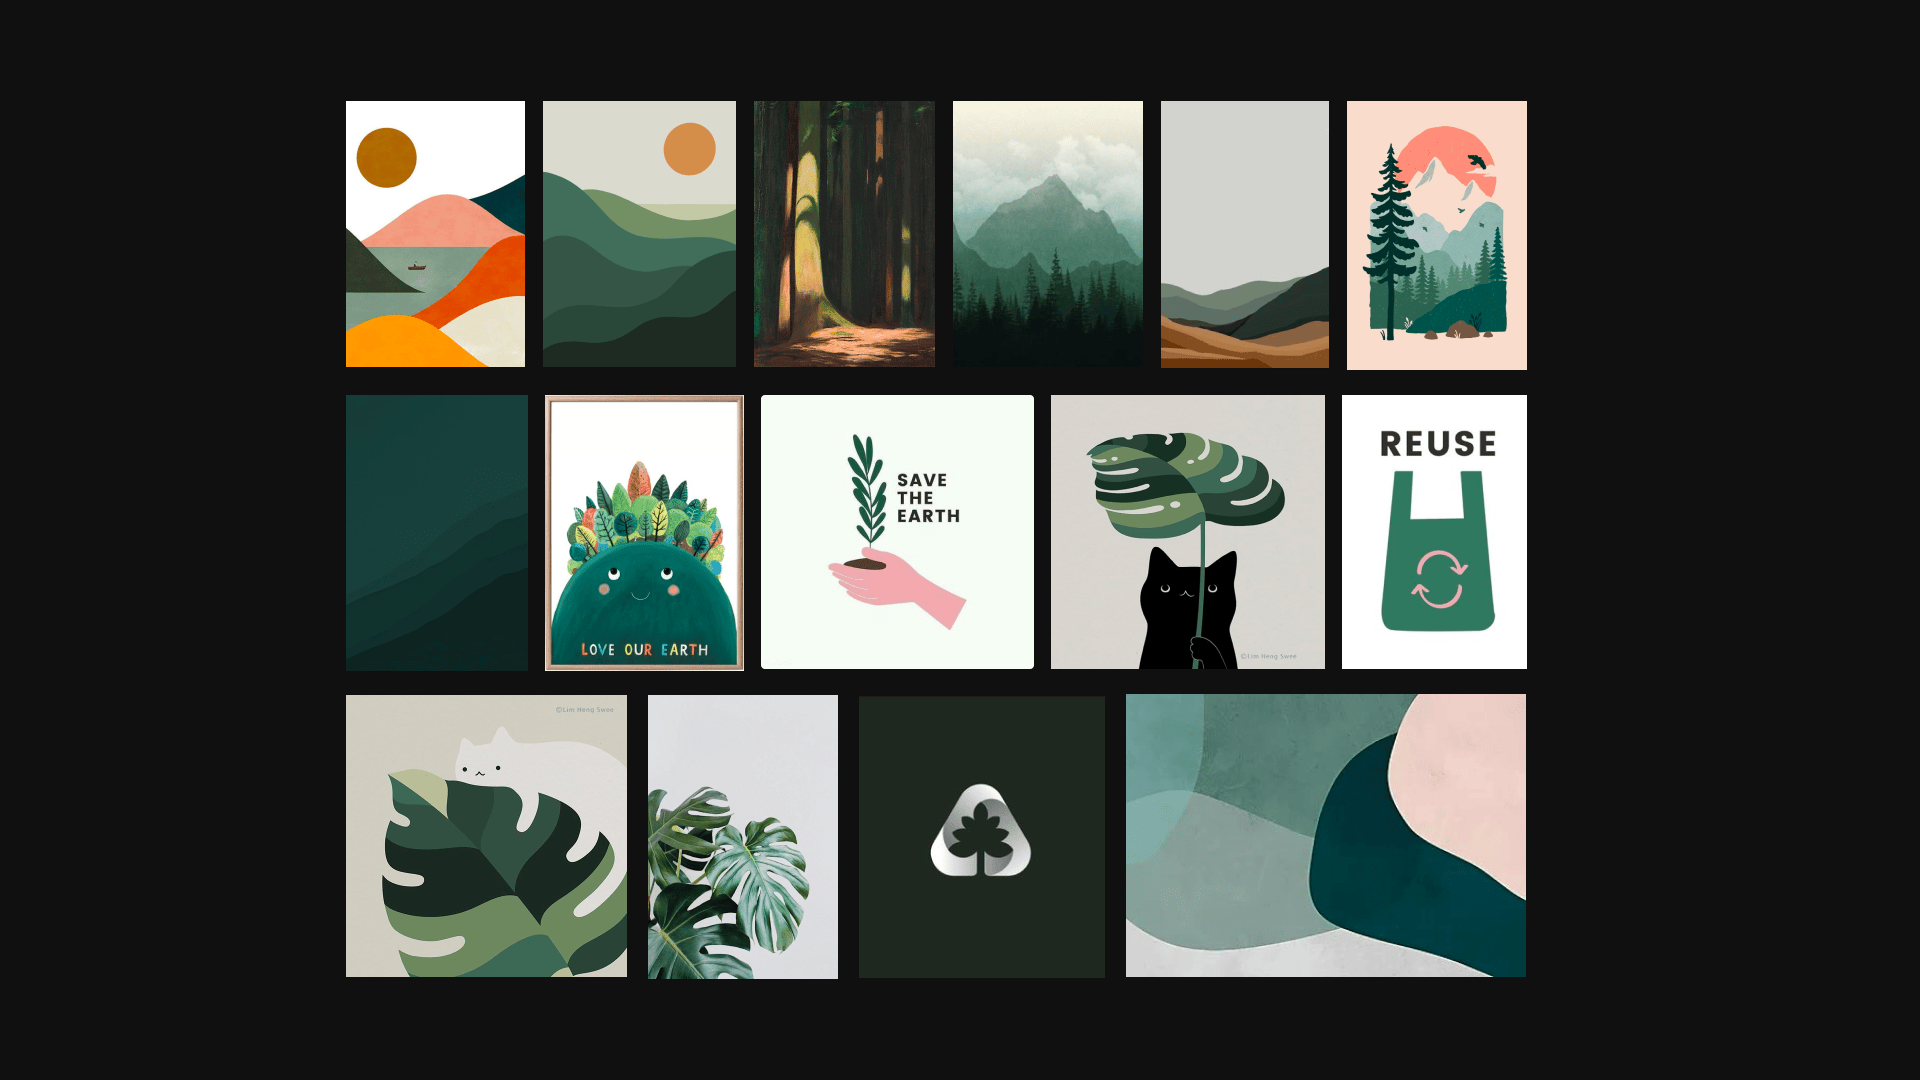 The moodboard we crafted for the app, featuring soft, green earth tones contrasted with scattered, warm pinks and oranges. Lots of illustrative hills and soft curves.